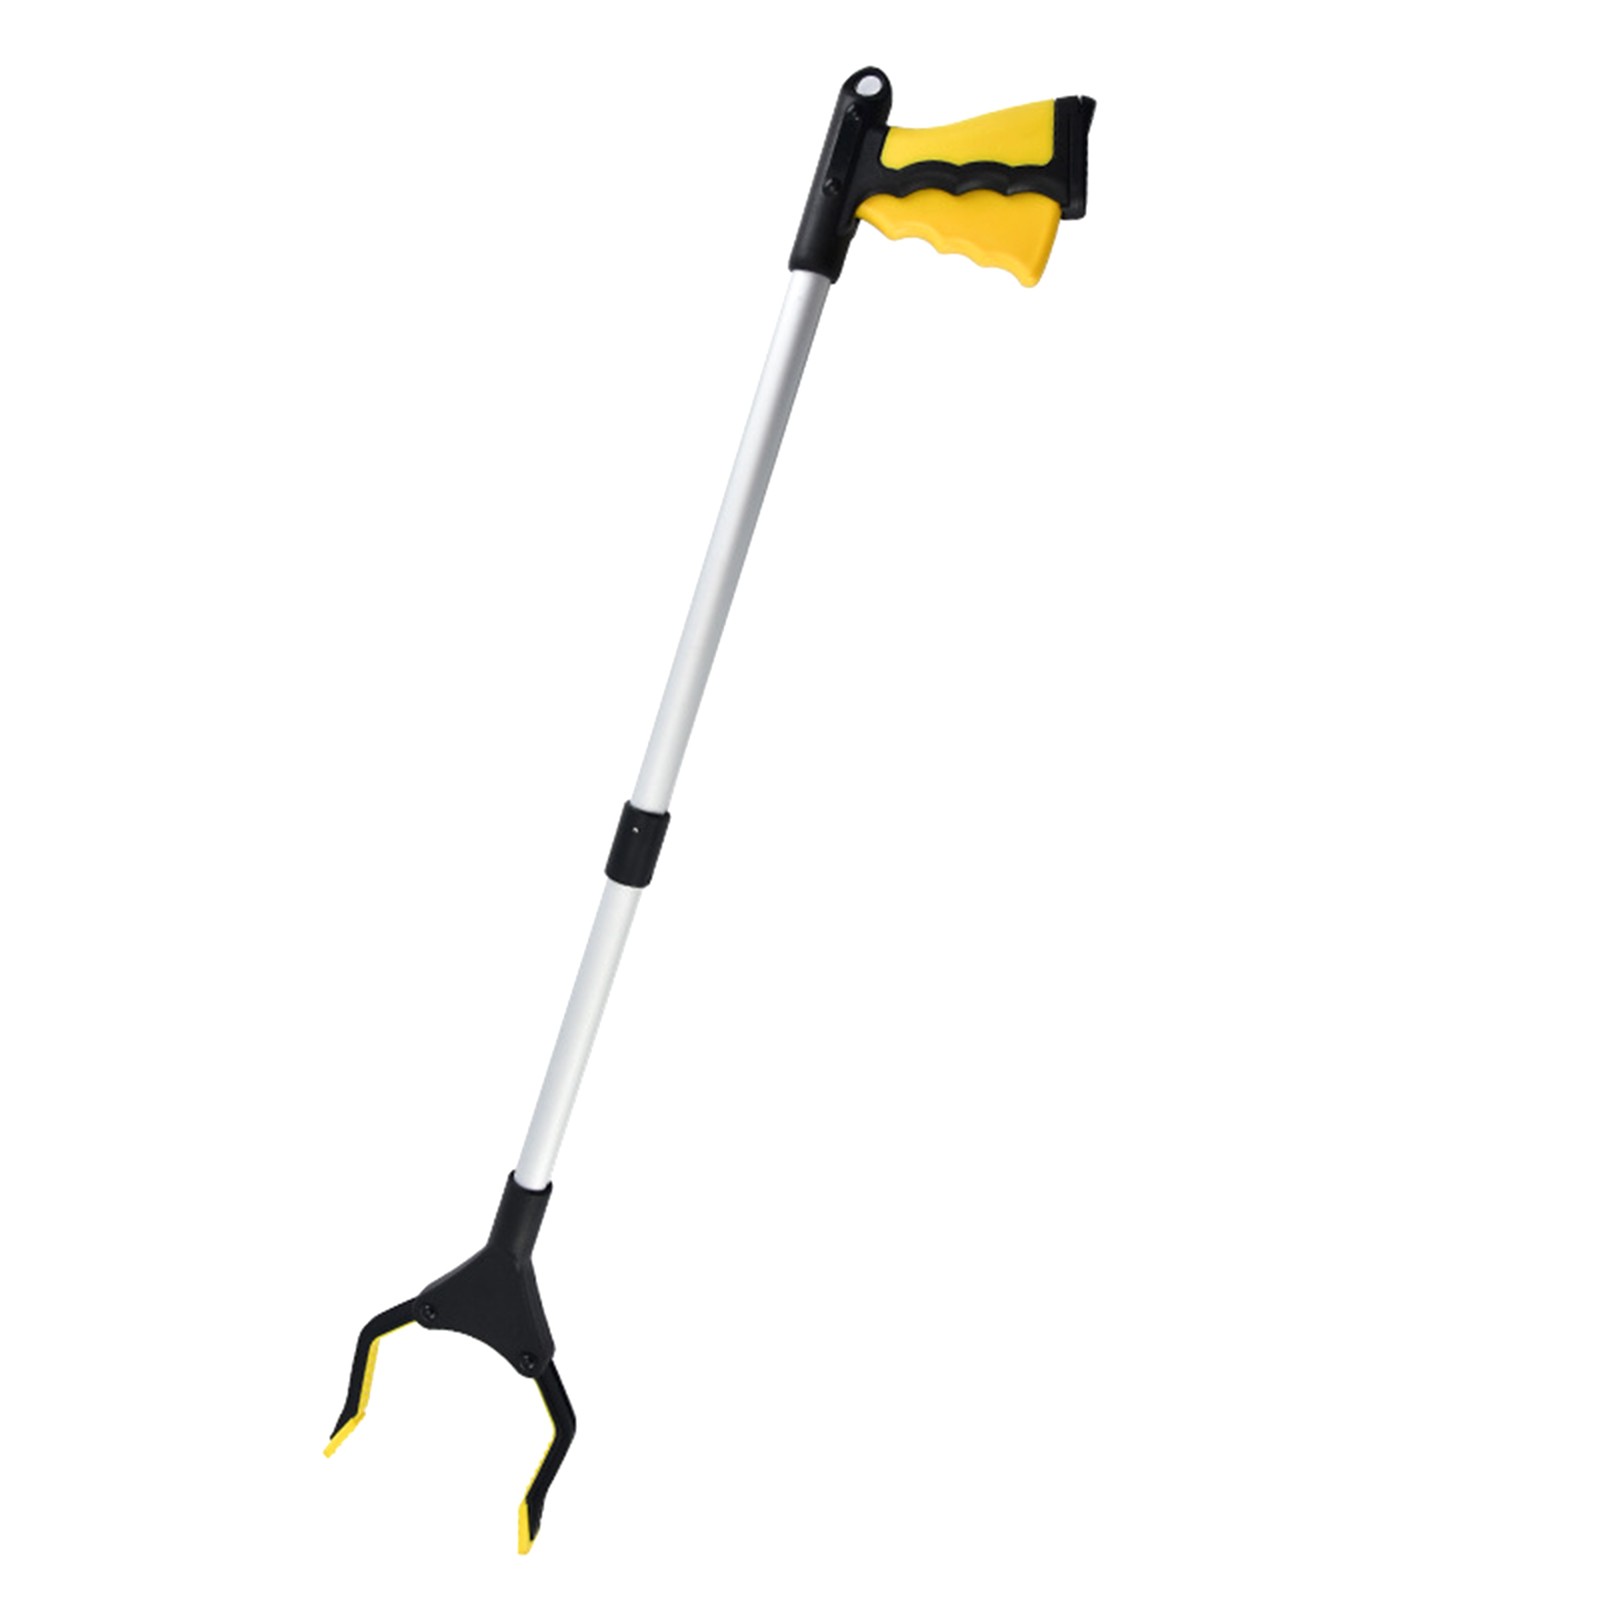 Grabber Reacher Tool,31 Inch Extra Long Steel Foldable Pick Up Stick with  Strong Grip Magnetic,360°Rotating Anti-Slip Jaw,Trash Claw Grabber Tool,Hand  Grabber for Reaching,Arm Extension yellow 